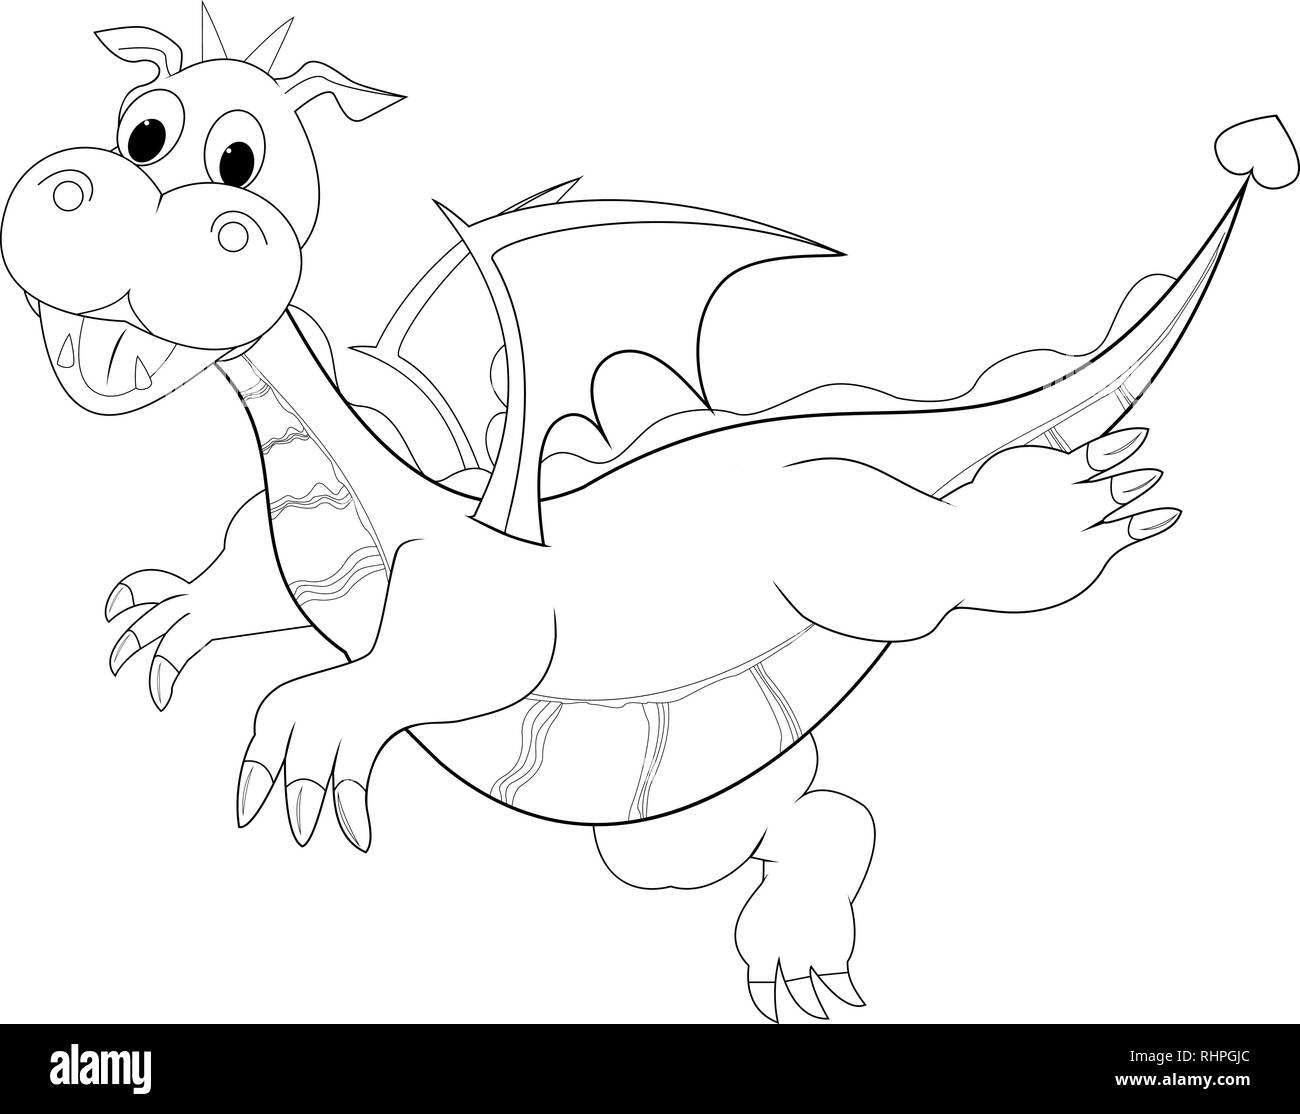 Dragon outline on a white background. Sketch of a flying dragon for coloring. Stock Vector